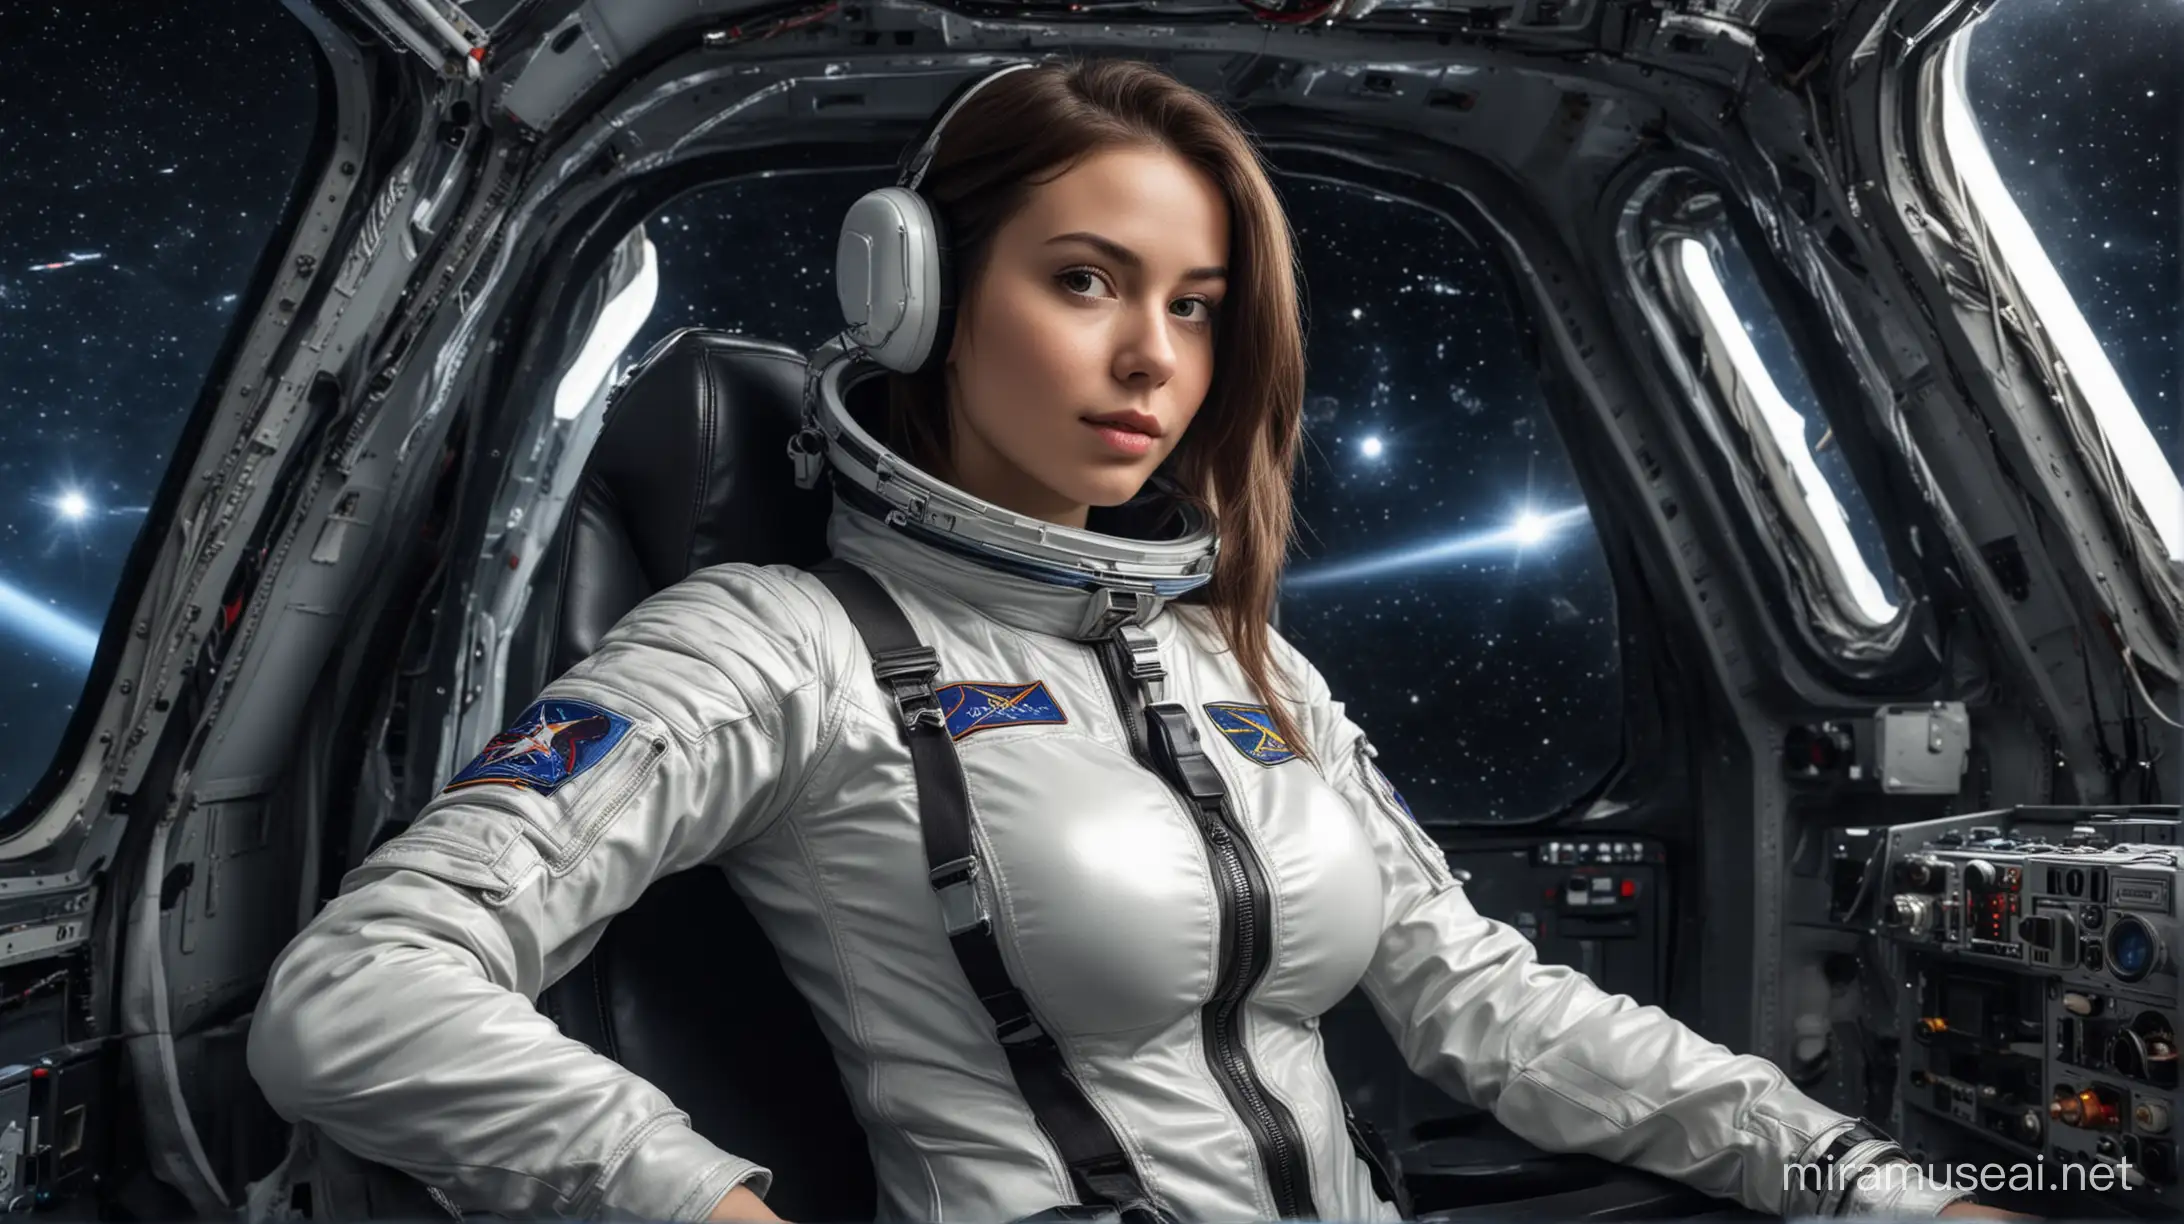 Curvy Astronaut in FormFitting Spacesuit Commanding a Starship